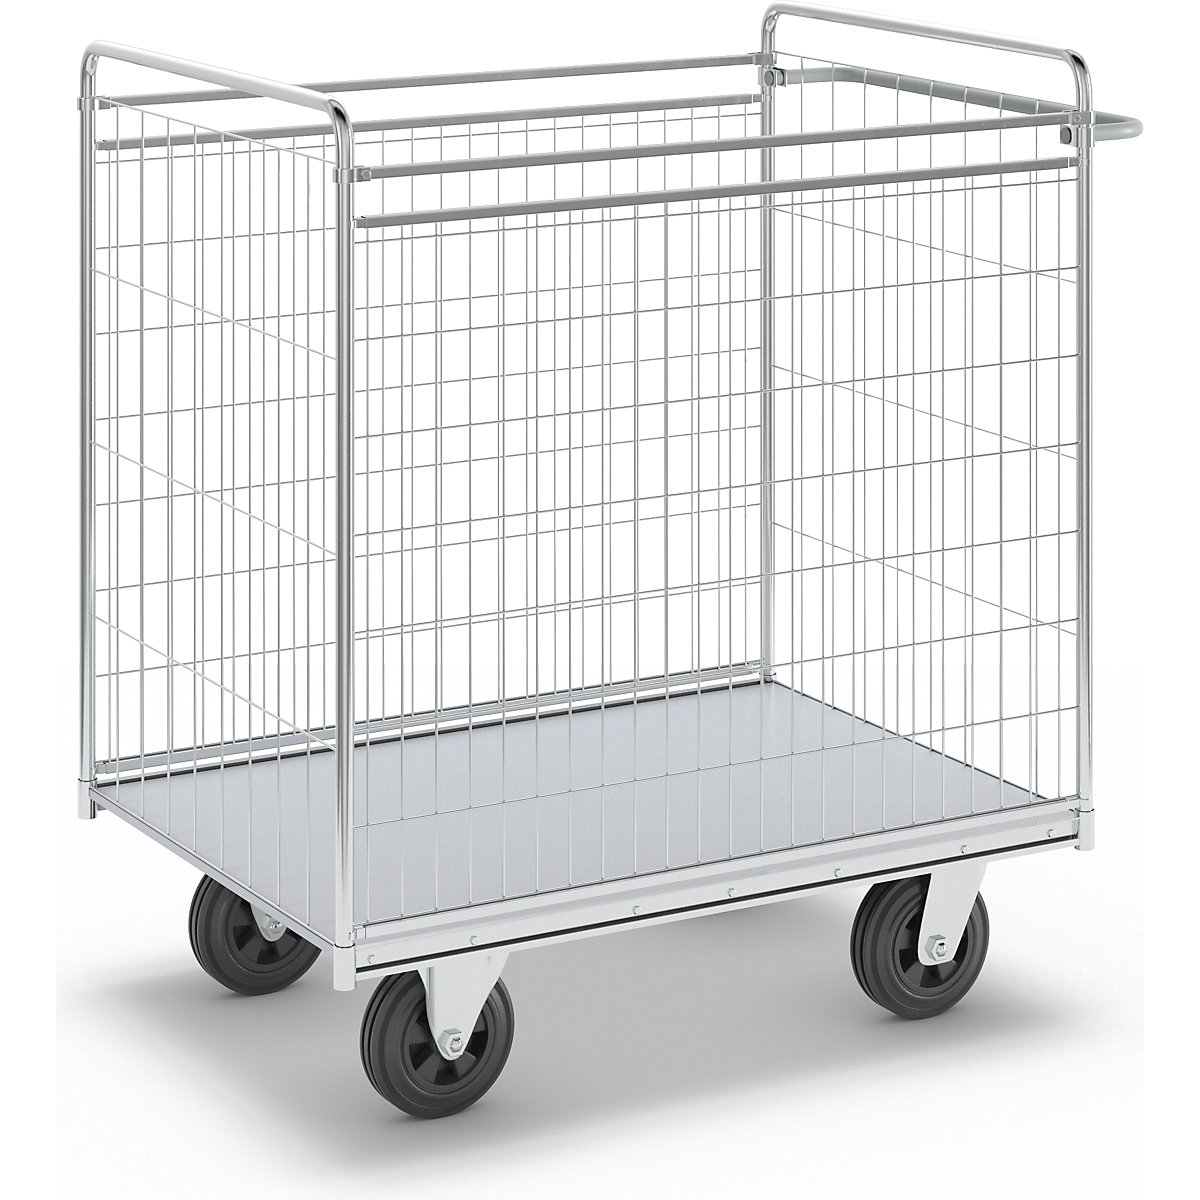 SERIES 300 four-sided trolley – HelgeNyberg, model 82, low, LxWxH 990 x 650 x 1030 mm-2